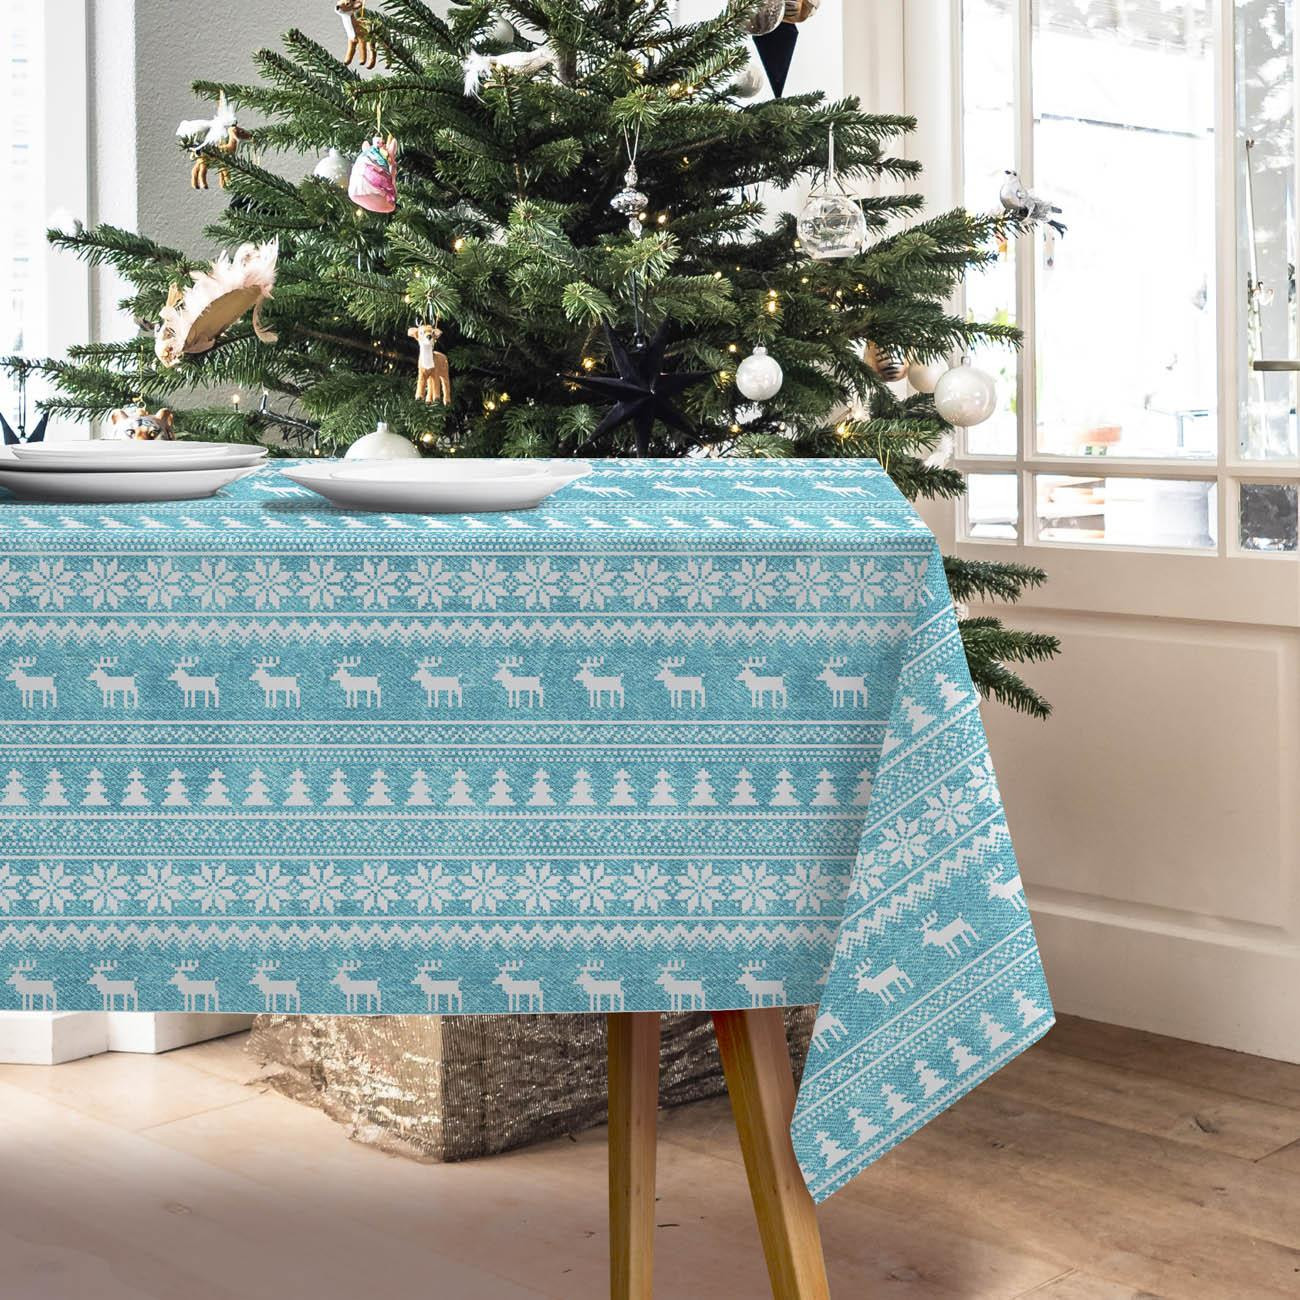 REINDEERS PAT. 2 / ACID WASH SEA BLUE - Woven Fabric for tablecloths